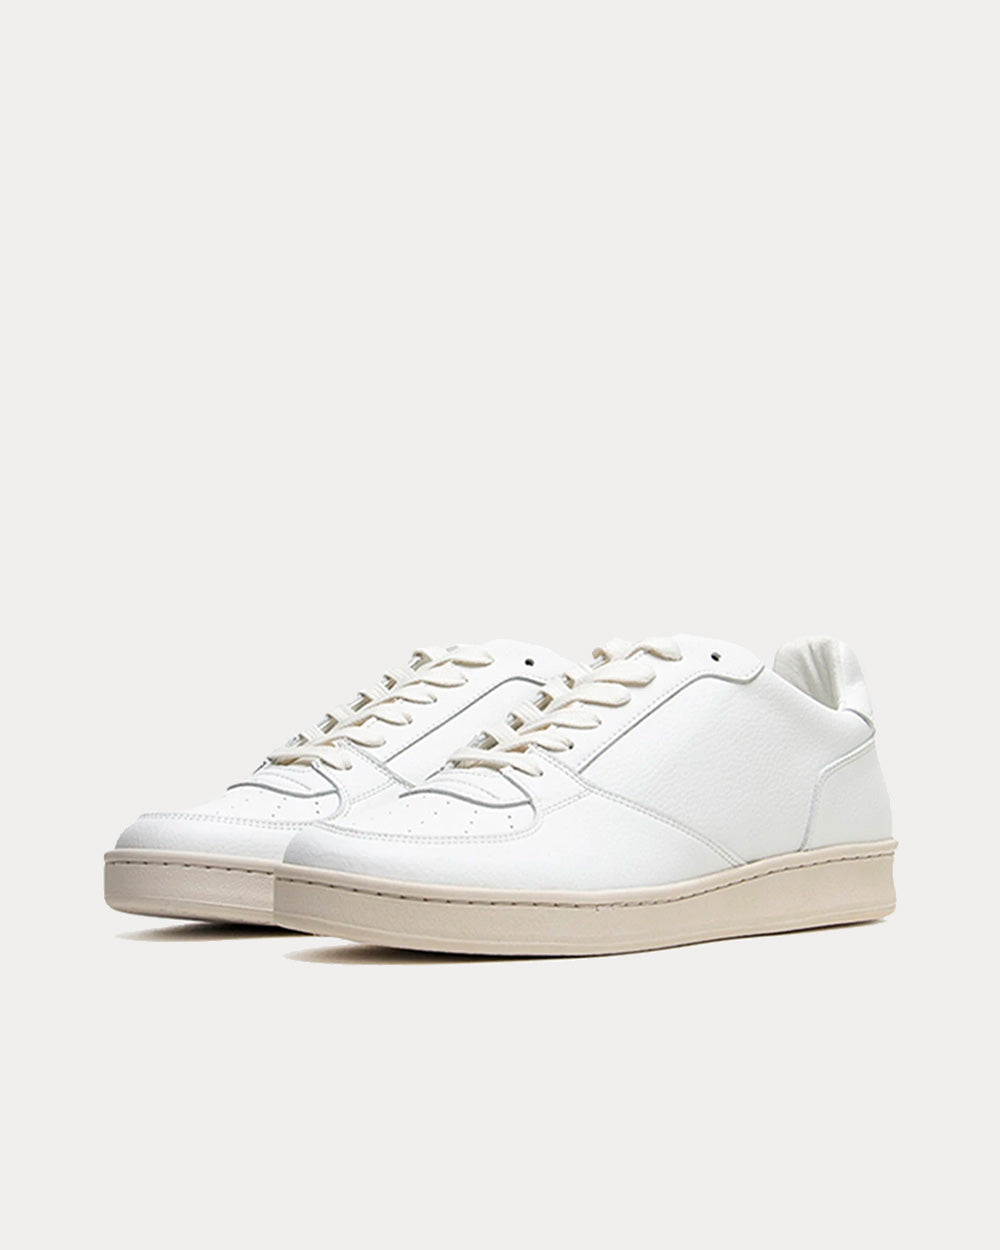 Humans Are Vain - Eden V2 Sustainable Vegan Leather White Low Top Sneakers